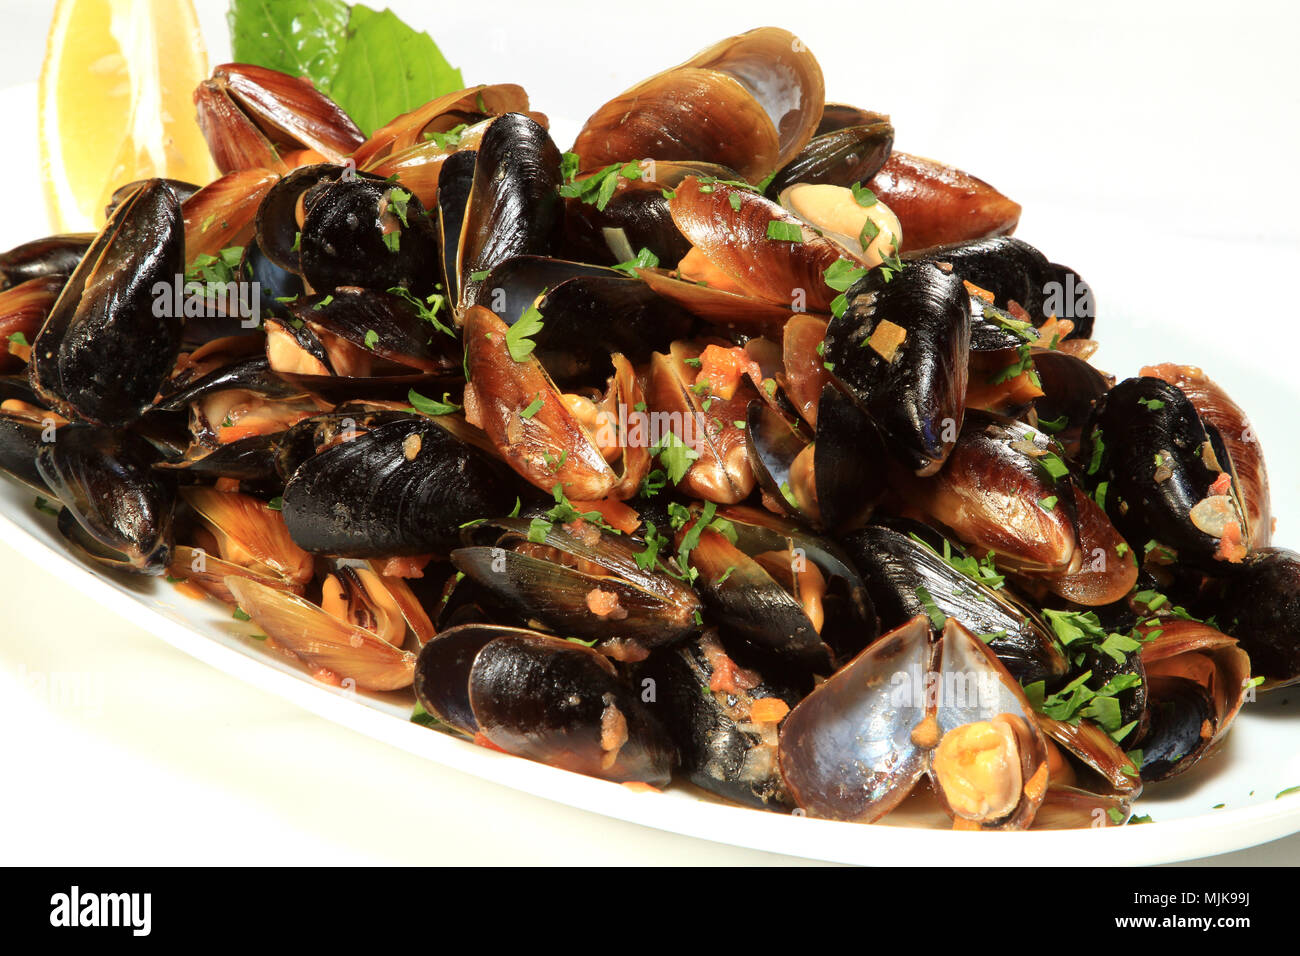 cooked clams, mussels on a plate Stock Photo